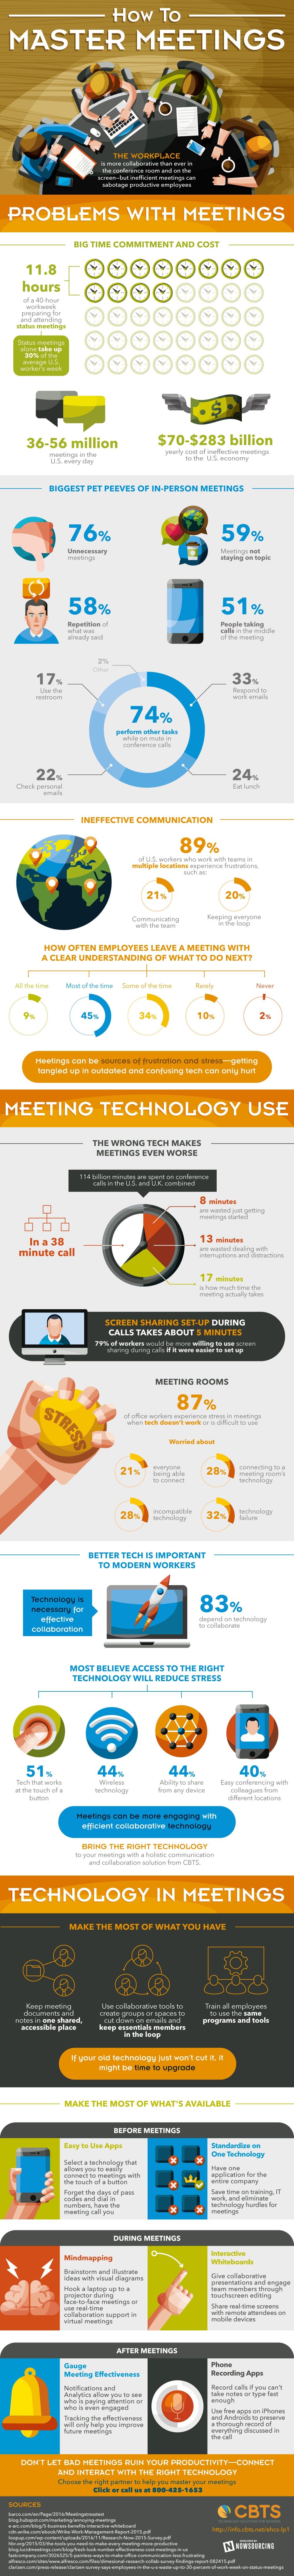 Learn to master meetings with the right technology